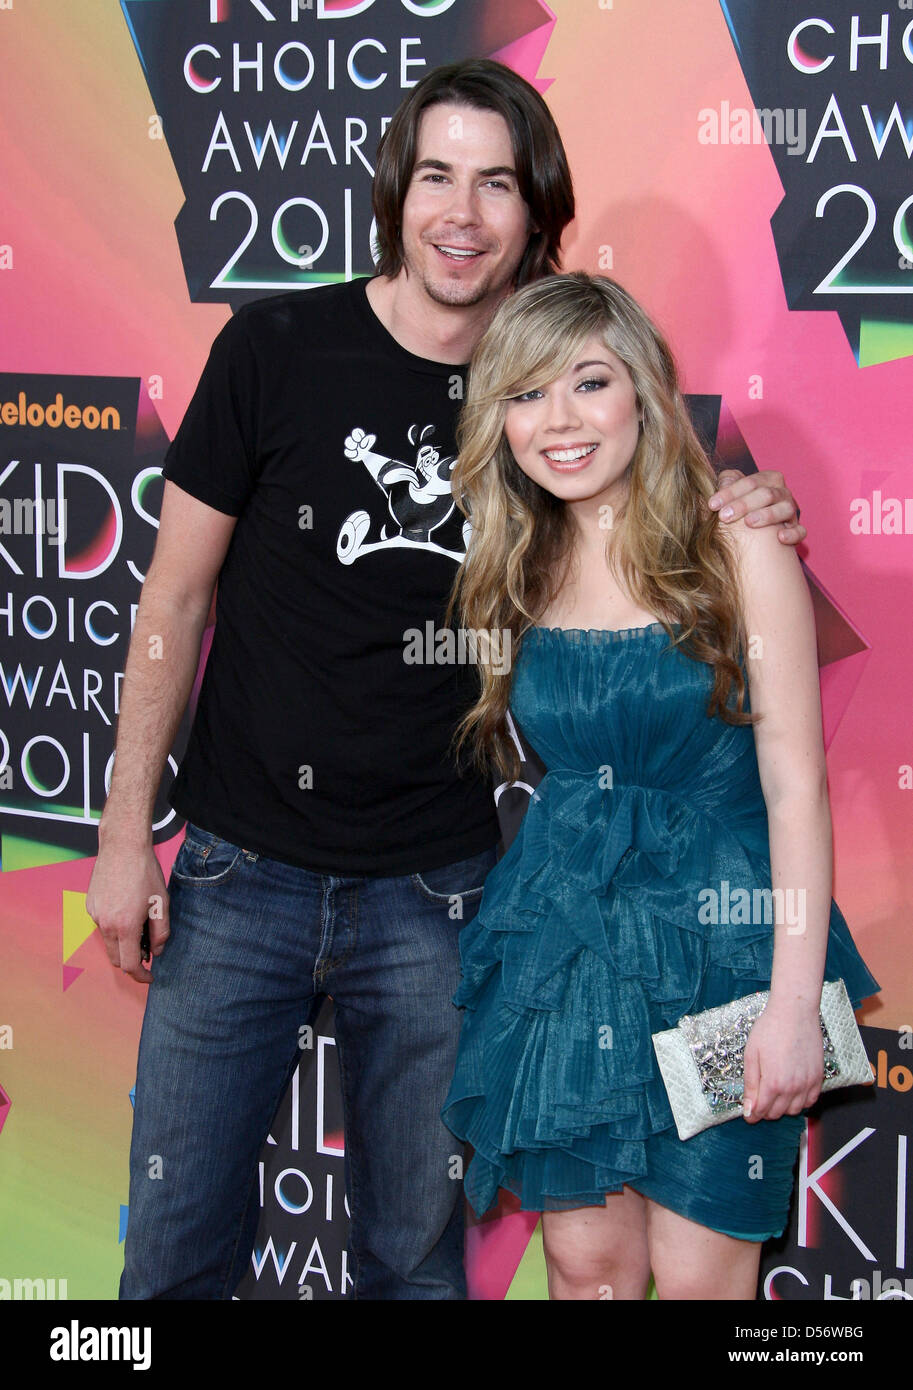 US actors Jennette McCurdy and Jerry Trainor arrive at Nickelodeon's 23rd Annual Kids' Choice Awards held at UCLA's Pauley Pavilion in Los Angeles, USA, 27 March 2010. Kids' top choices in television, movies, music and sports were revealed via winners' boxes that contained everything from a live animal, to a human hand, inflatable man and of course slime. Photo: Hubert Boesl Stock Photo